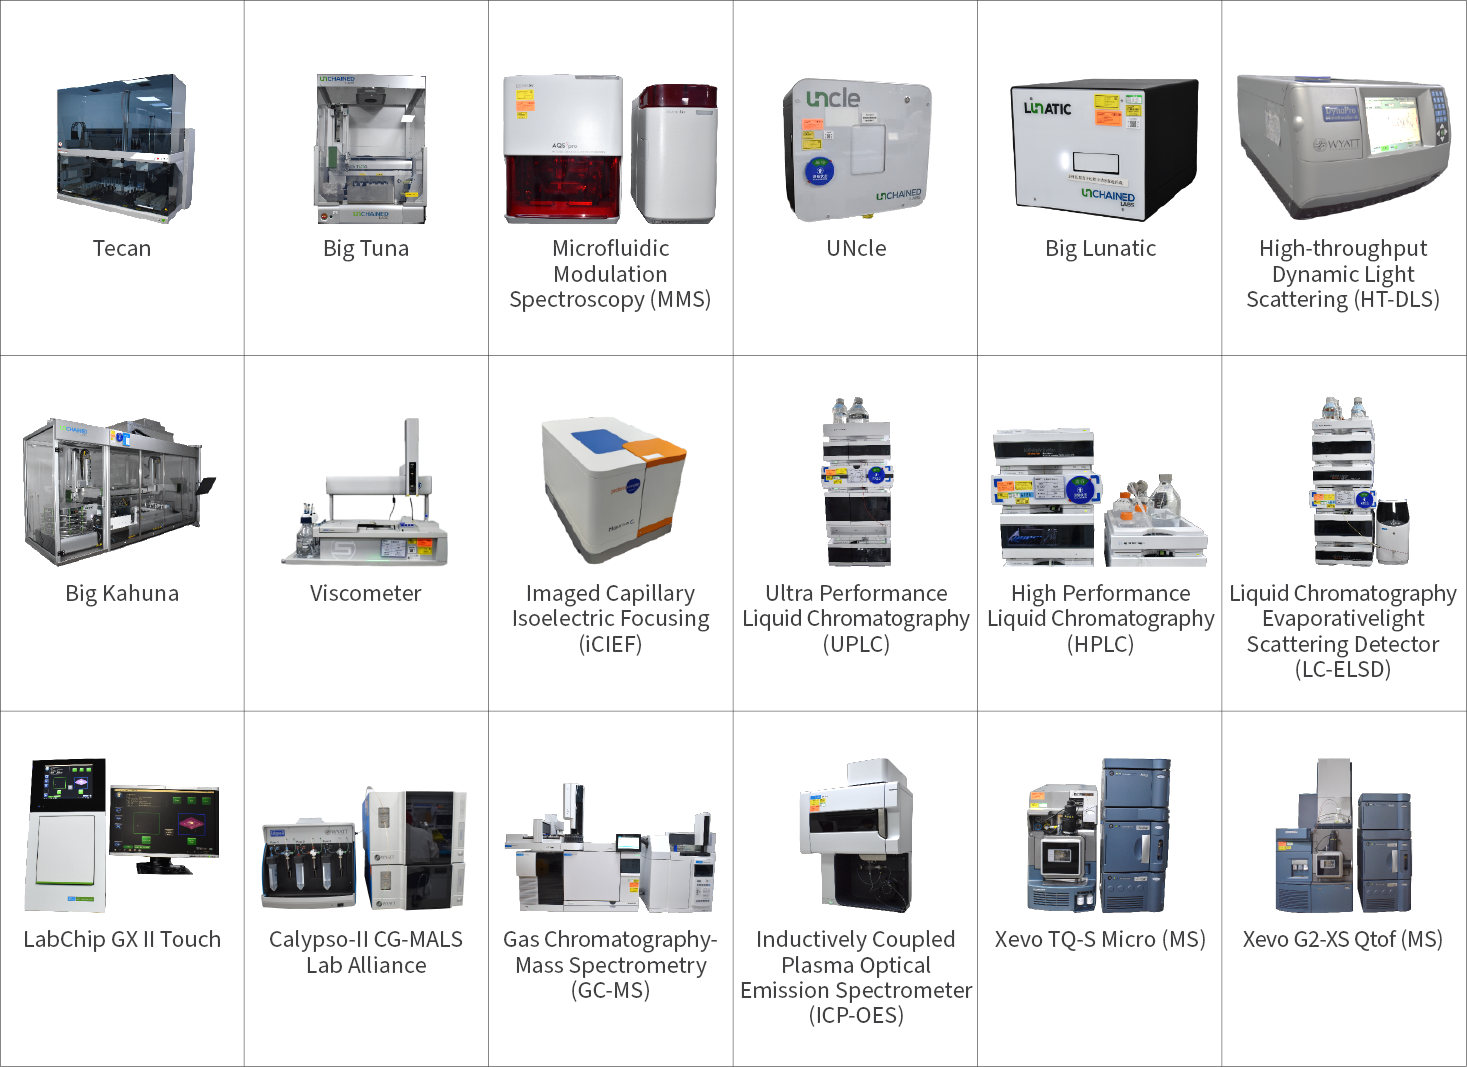 WuXi Biologics State of the Art Equipment for Drug Product Development - High Throughput